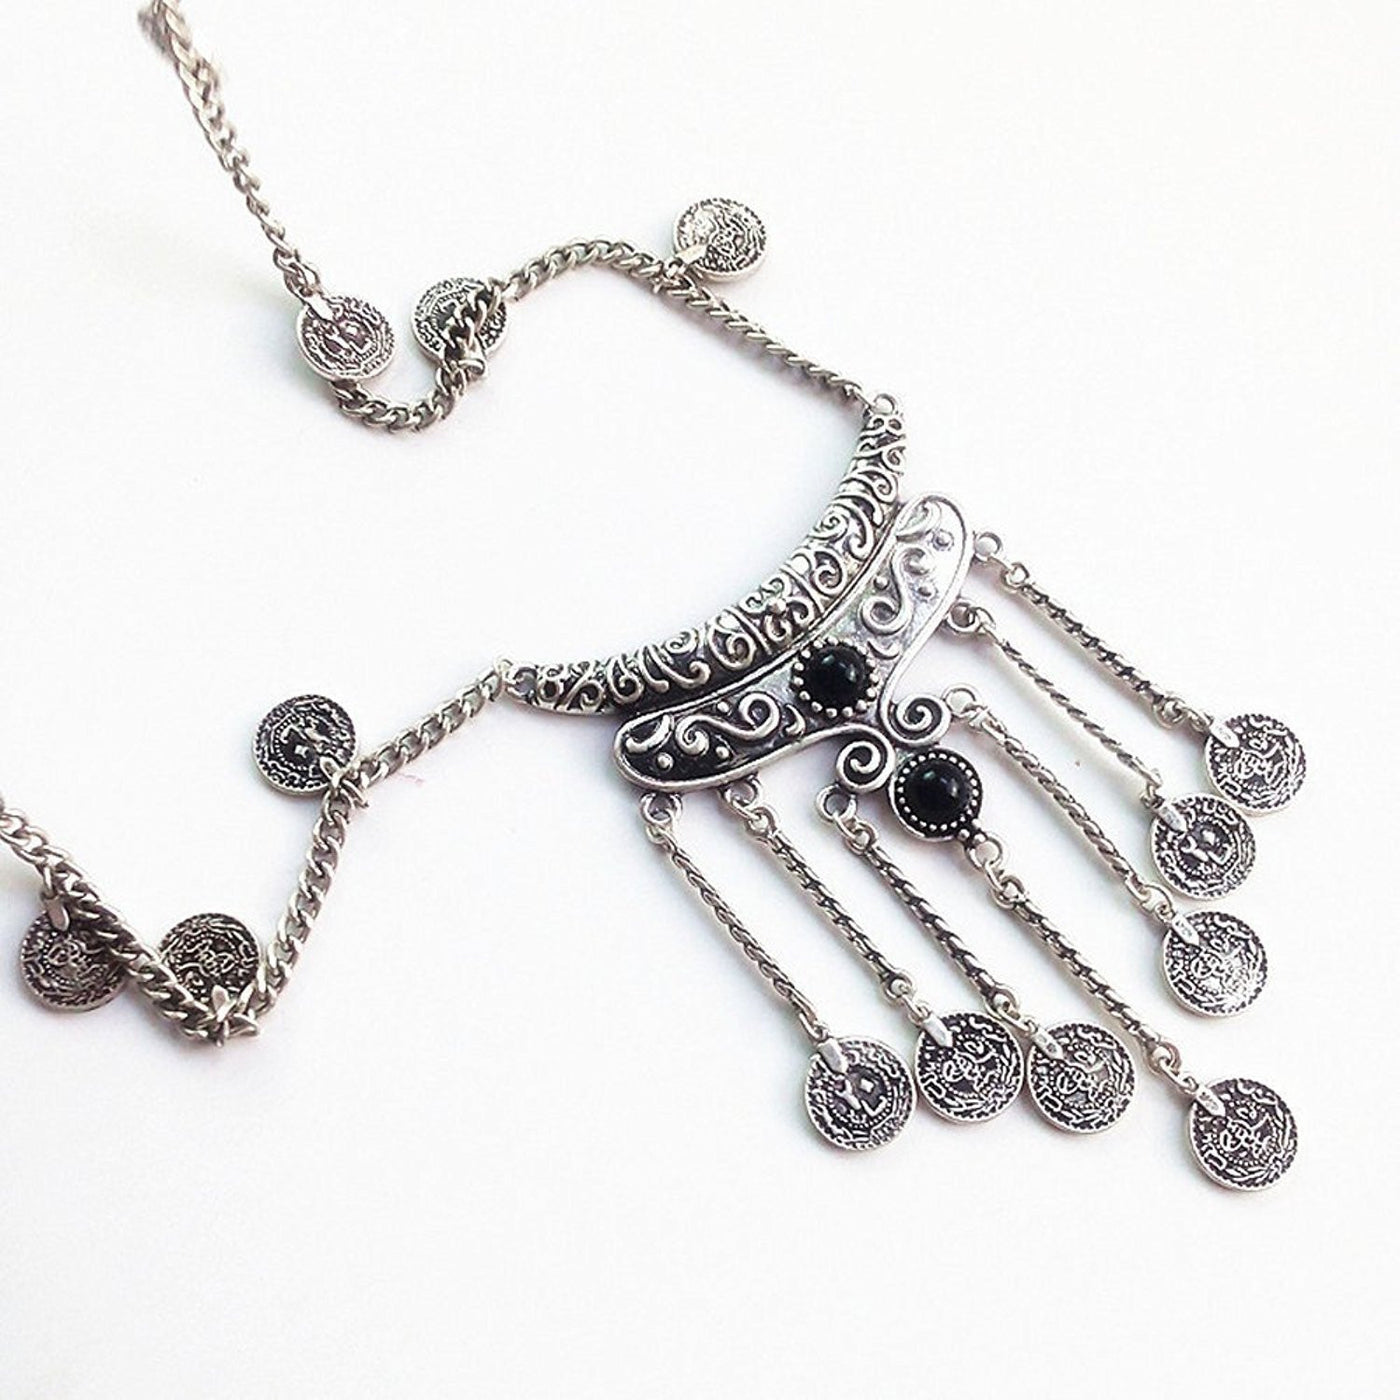 Antique Bohemian Silver Tassels Coin Necklace Necklace